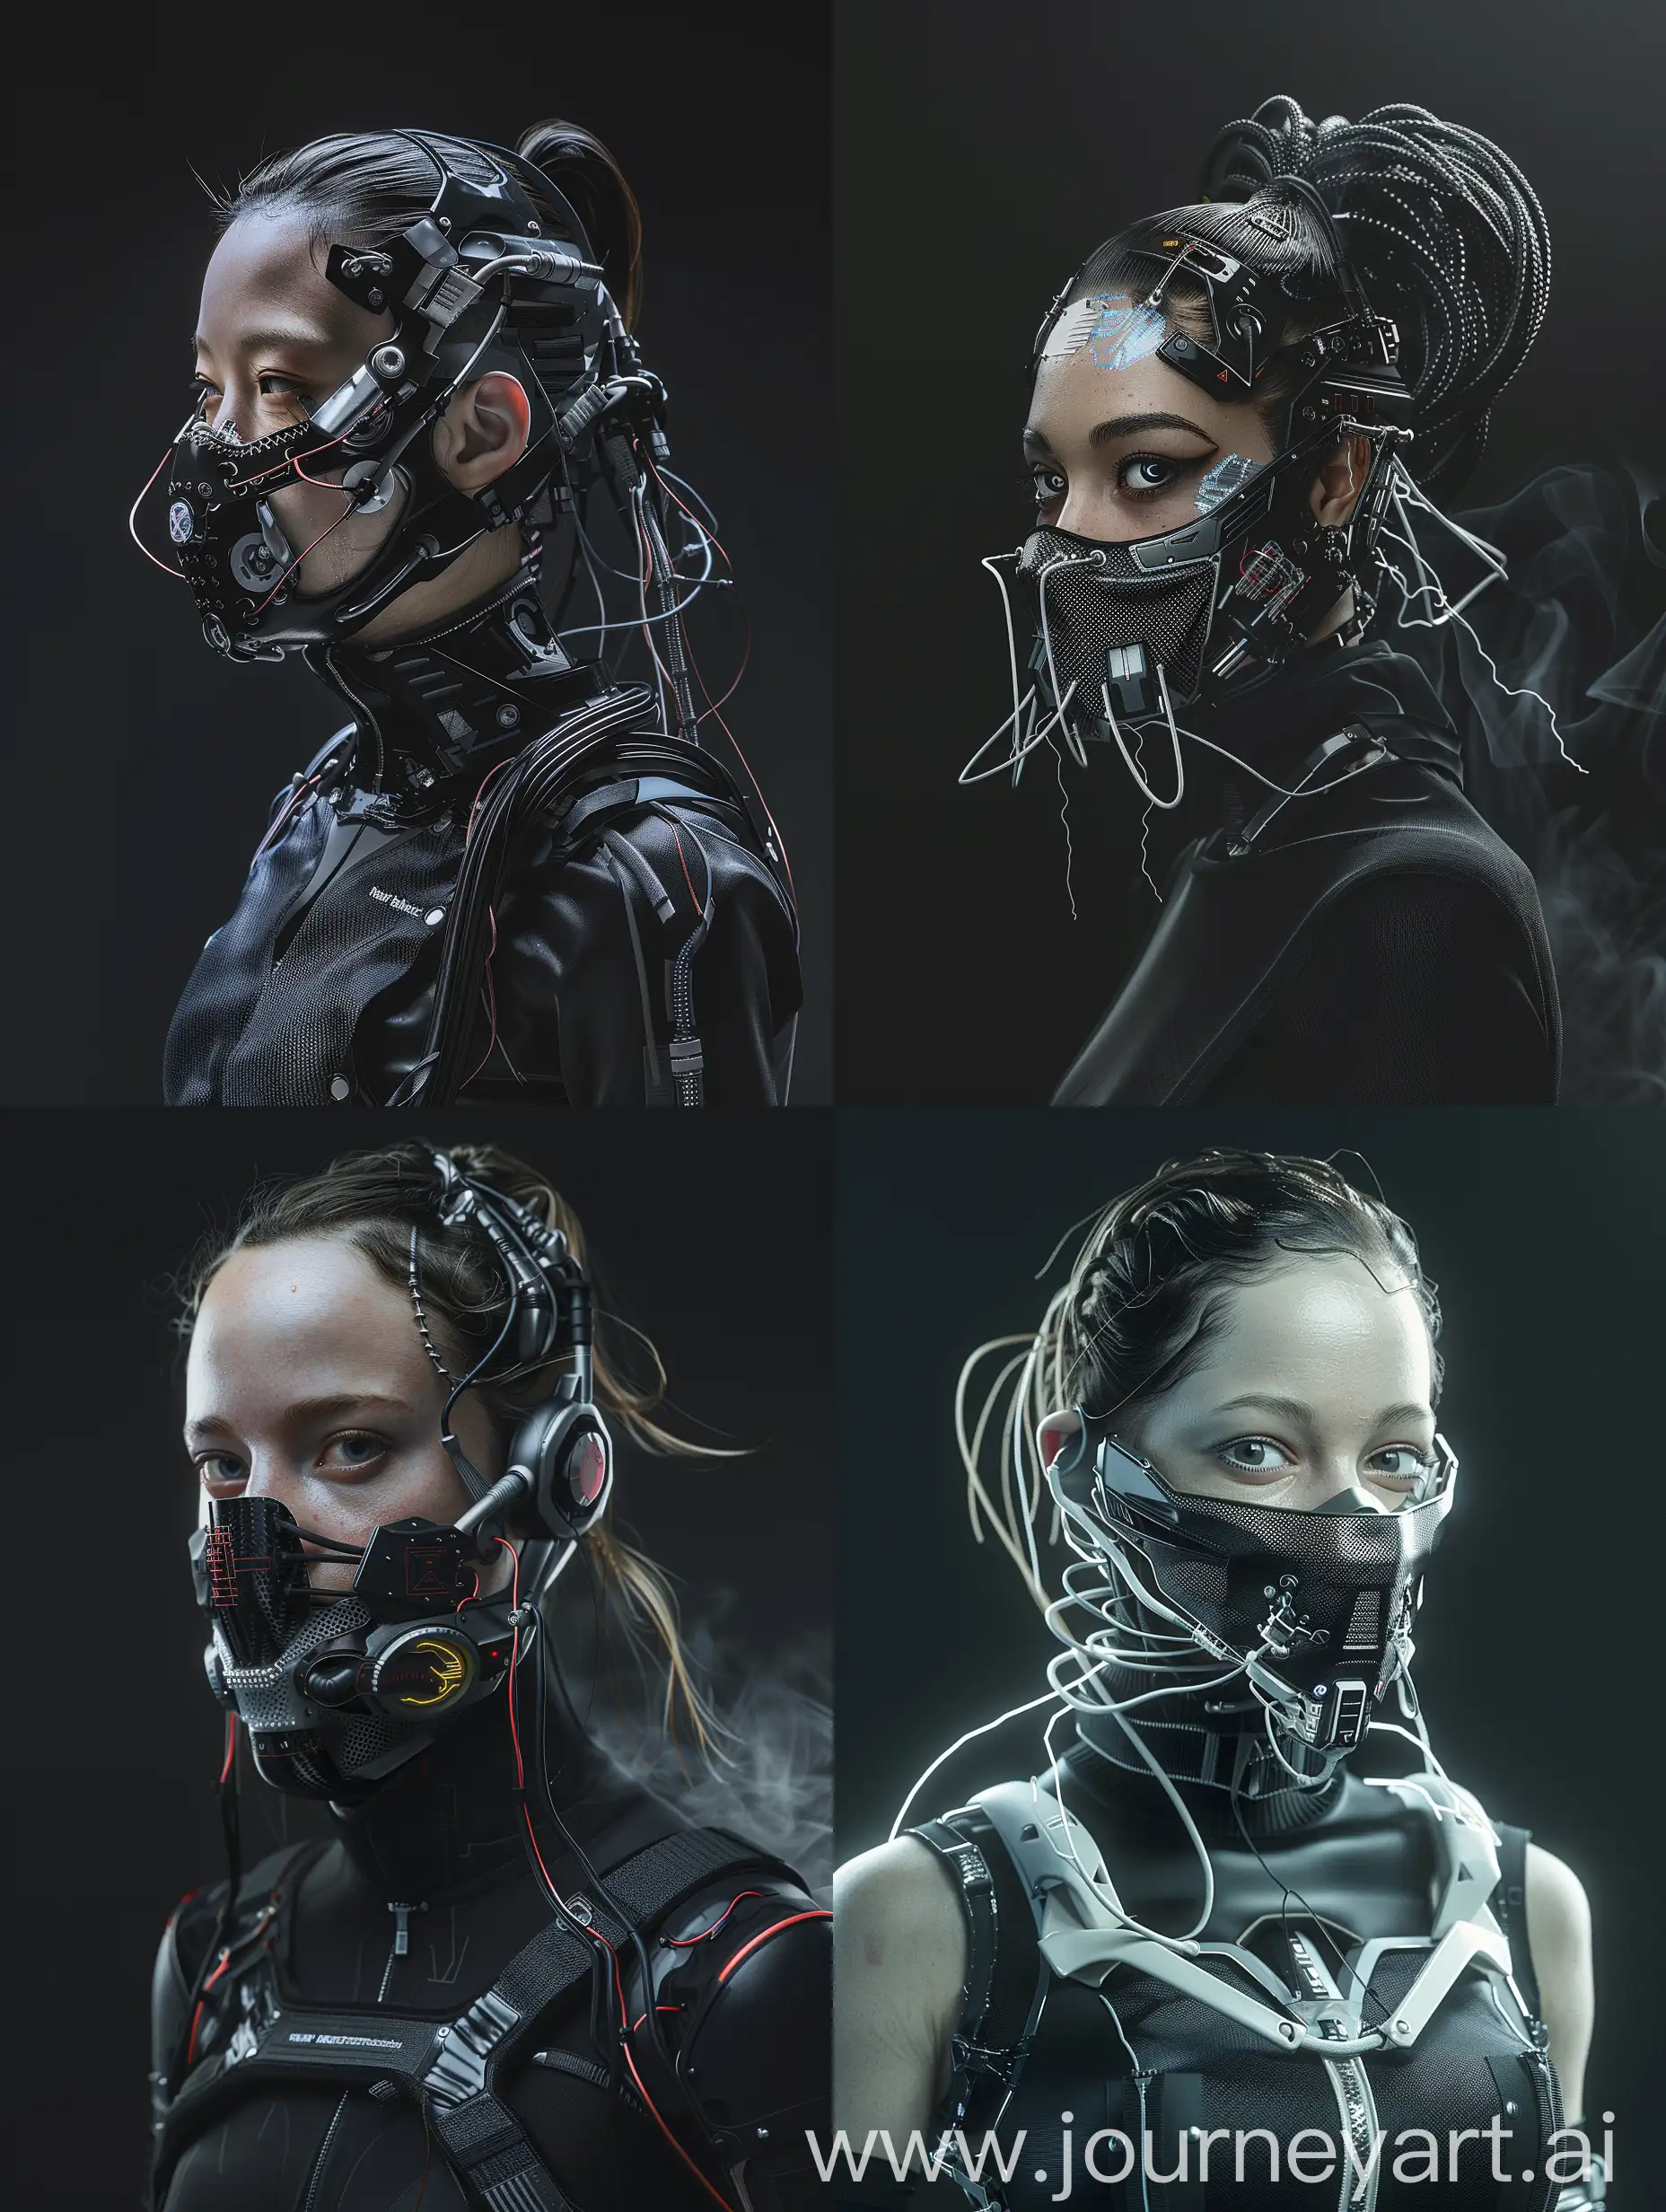 Against a sleek black backdrop, witness the captivating presence of a Beautiful characther adorned with a cybernetic mouth-covering mask. It seamlessly merges cutting-edge technology with intricate details, showcasing carbon fiber textures, sleek aluminum accents, and pulsating wires. Symbolizing the delicate equilibrium between humanity and machine, her appearance embodies the essence of a futuristic cyberpunk aesthetic, further accentuated by New Balance-inspired add-ons. With dynamic movements reminiscent of action-packed film sequences, accompanied by cinematic haze and an electric energy, she exudes an irresistible allure that commands attention